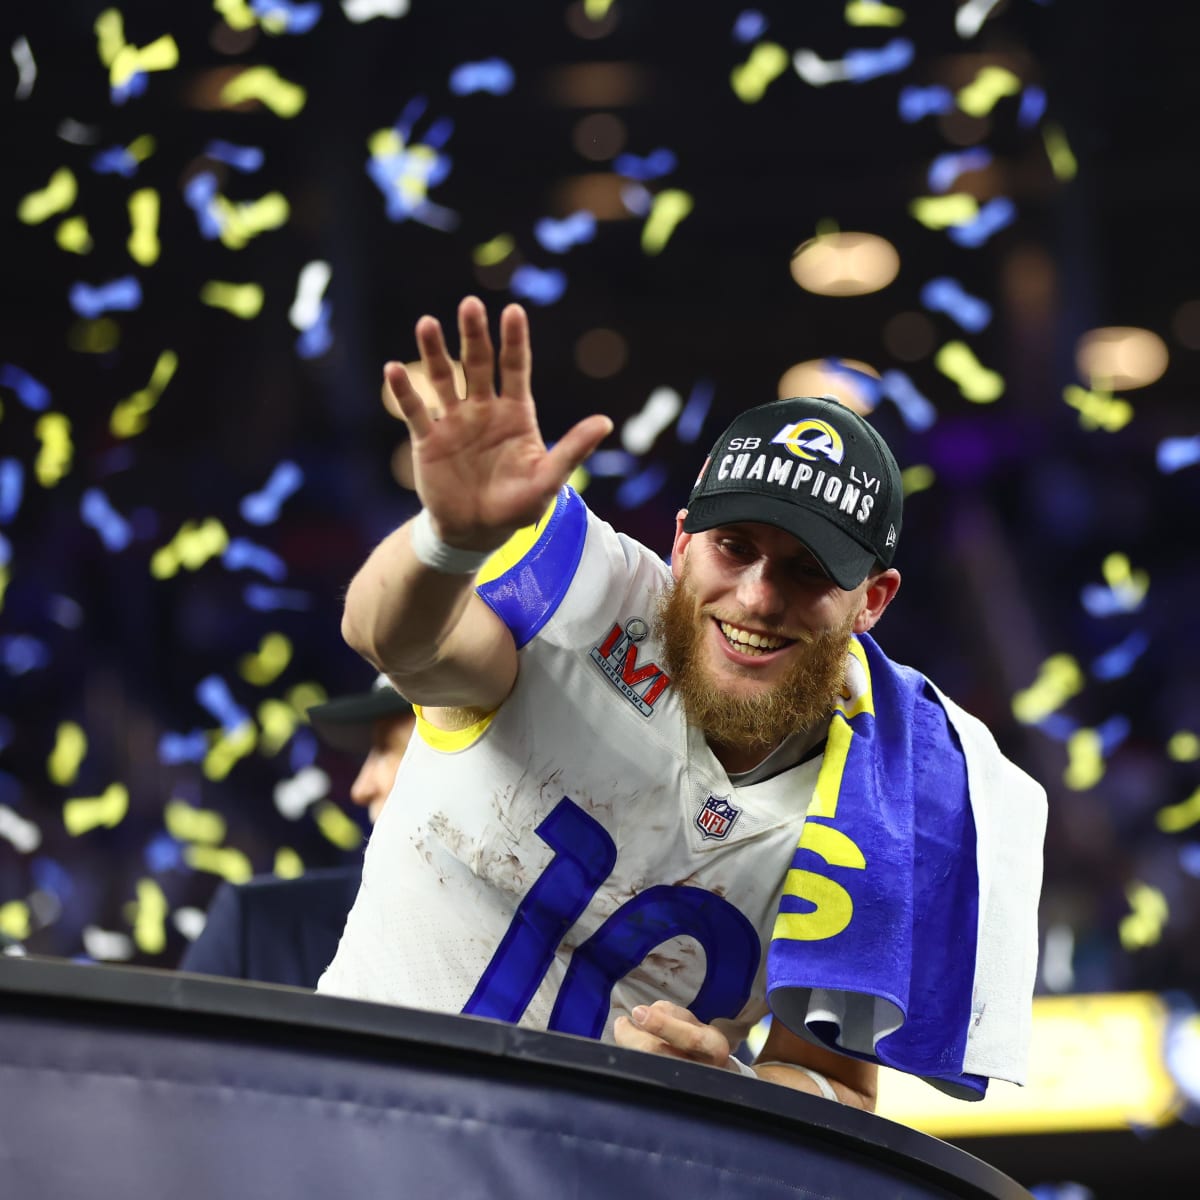 Los Angeles celebrates with parade After Rams Super Bowl Win - ESPN 98.1 FM  - 850 AM WRUF